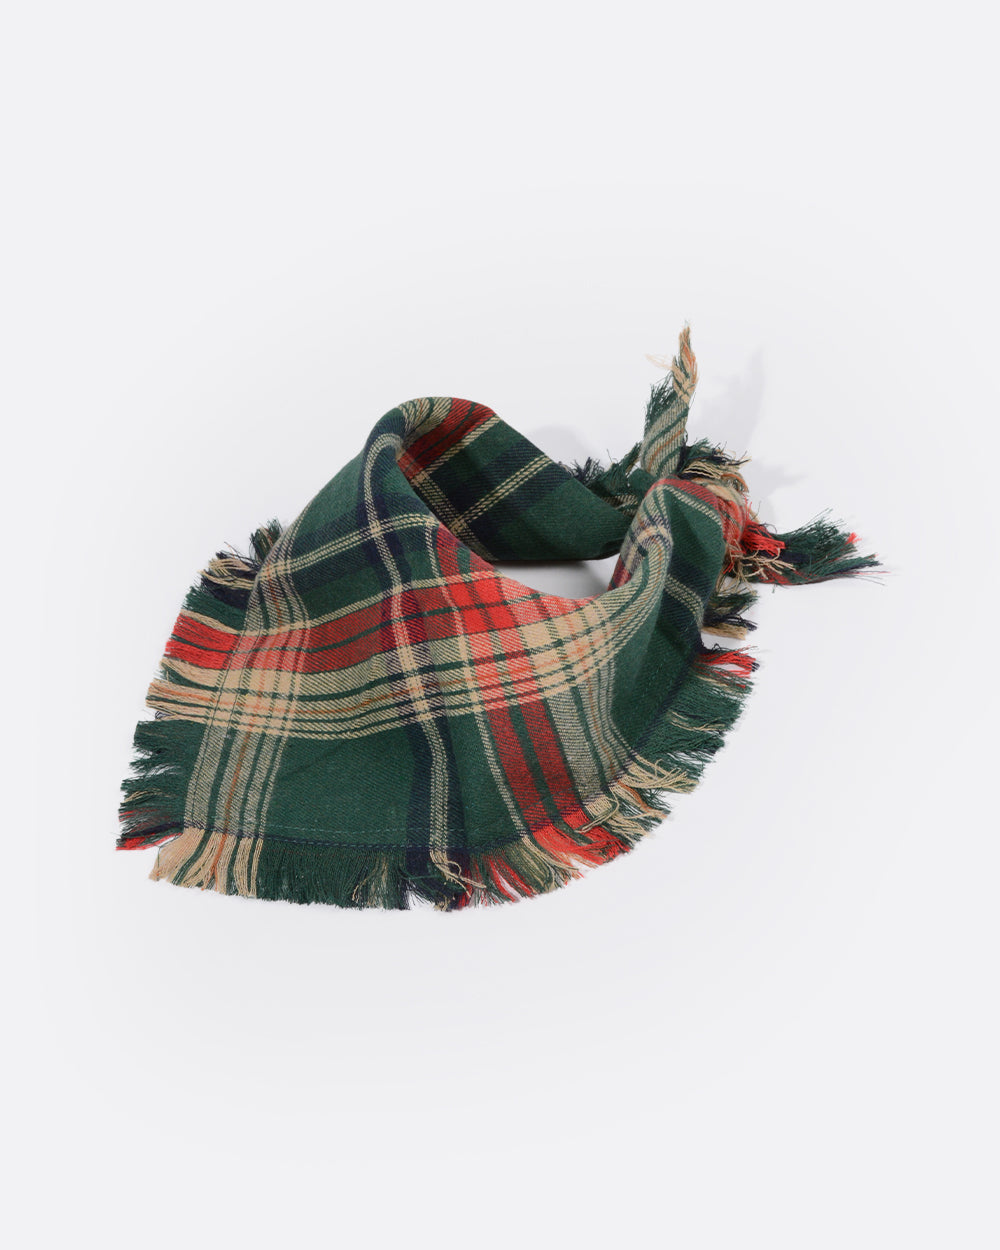 Bella & Pal Christmas Stewart plaid dog bandana made of soft cotton material.  It is skin-friendly for dogs. This Scottish style tartan pattern features green, red and khaki. Added with stylish edging design, it is an ideal pet accessory for Autumn, winter, or festival costume